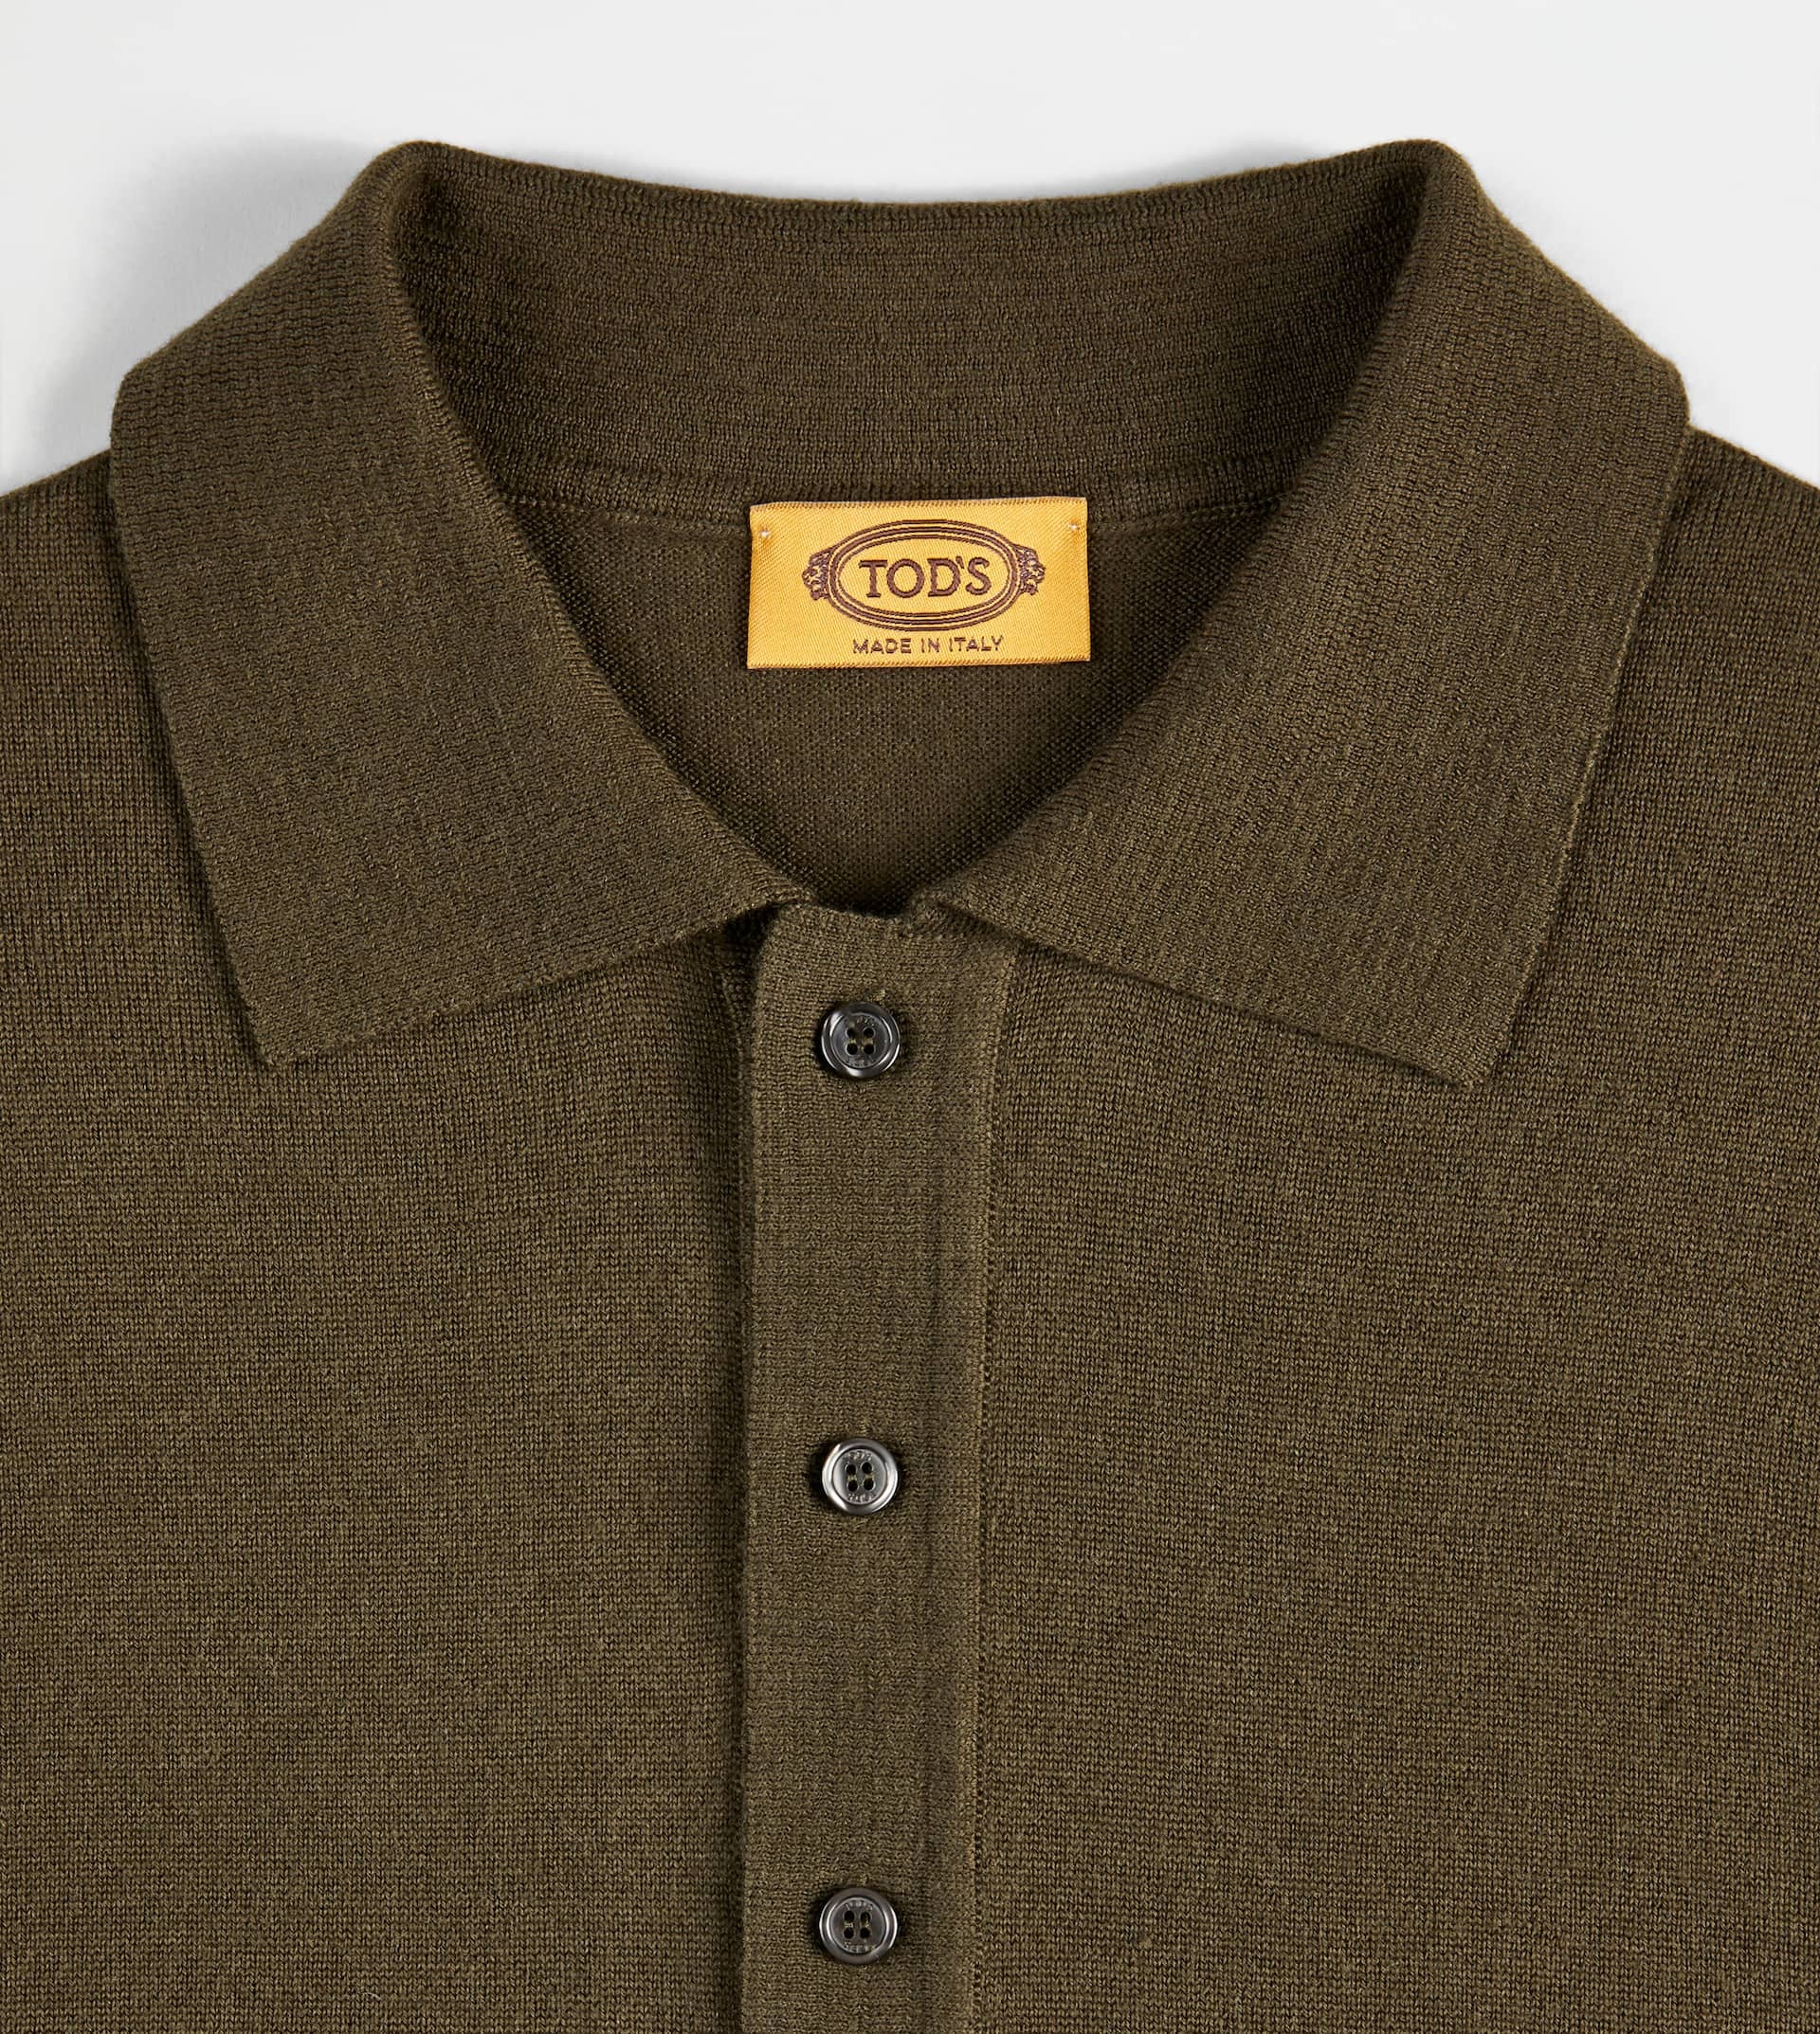 POLO SHIRT IN WOOL - GREEN, BROWN - 8